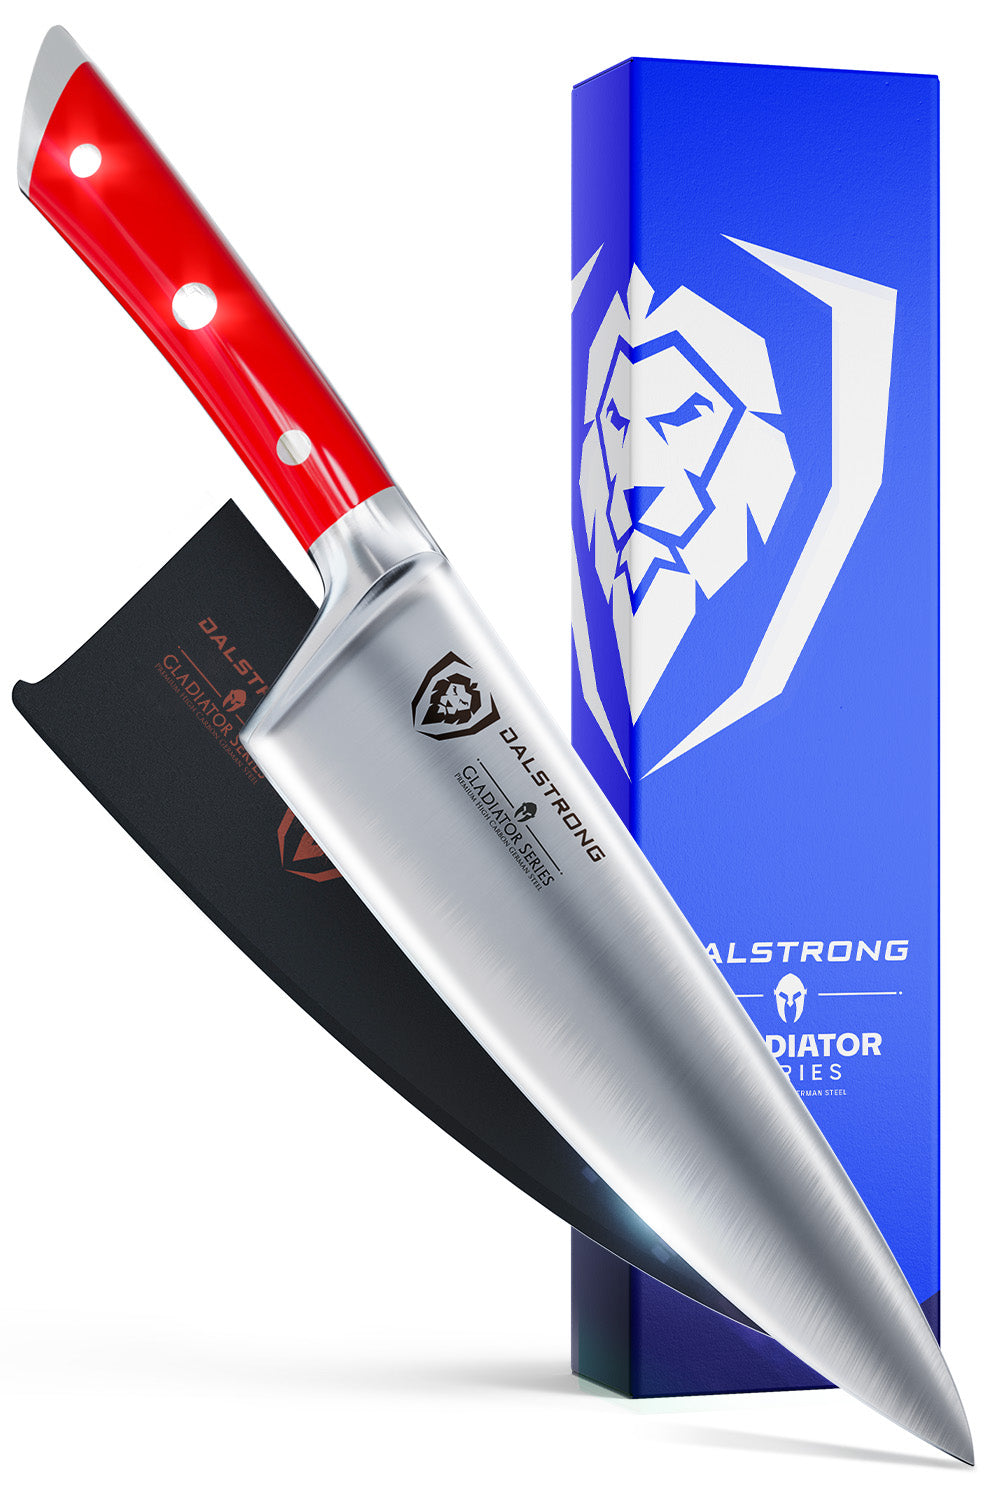 Chef's Knife 8" | Crimson Red Handle | Gladiator Series | NSF Certified | Dalstrong ©